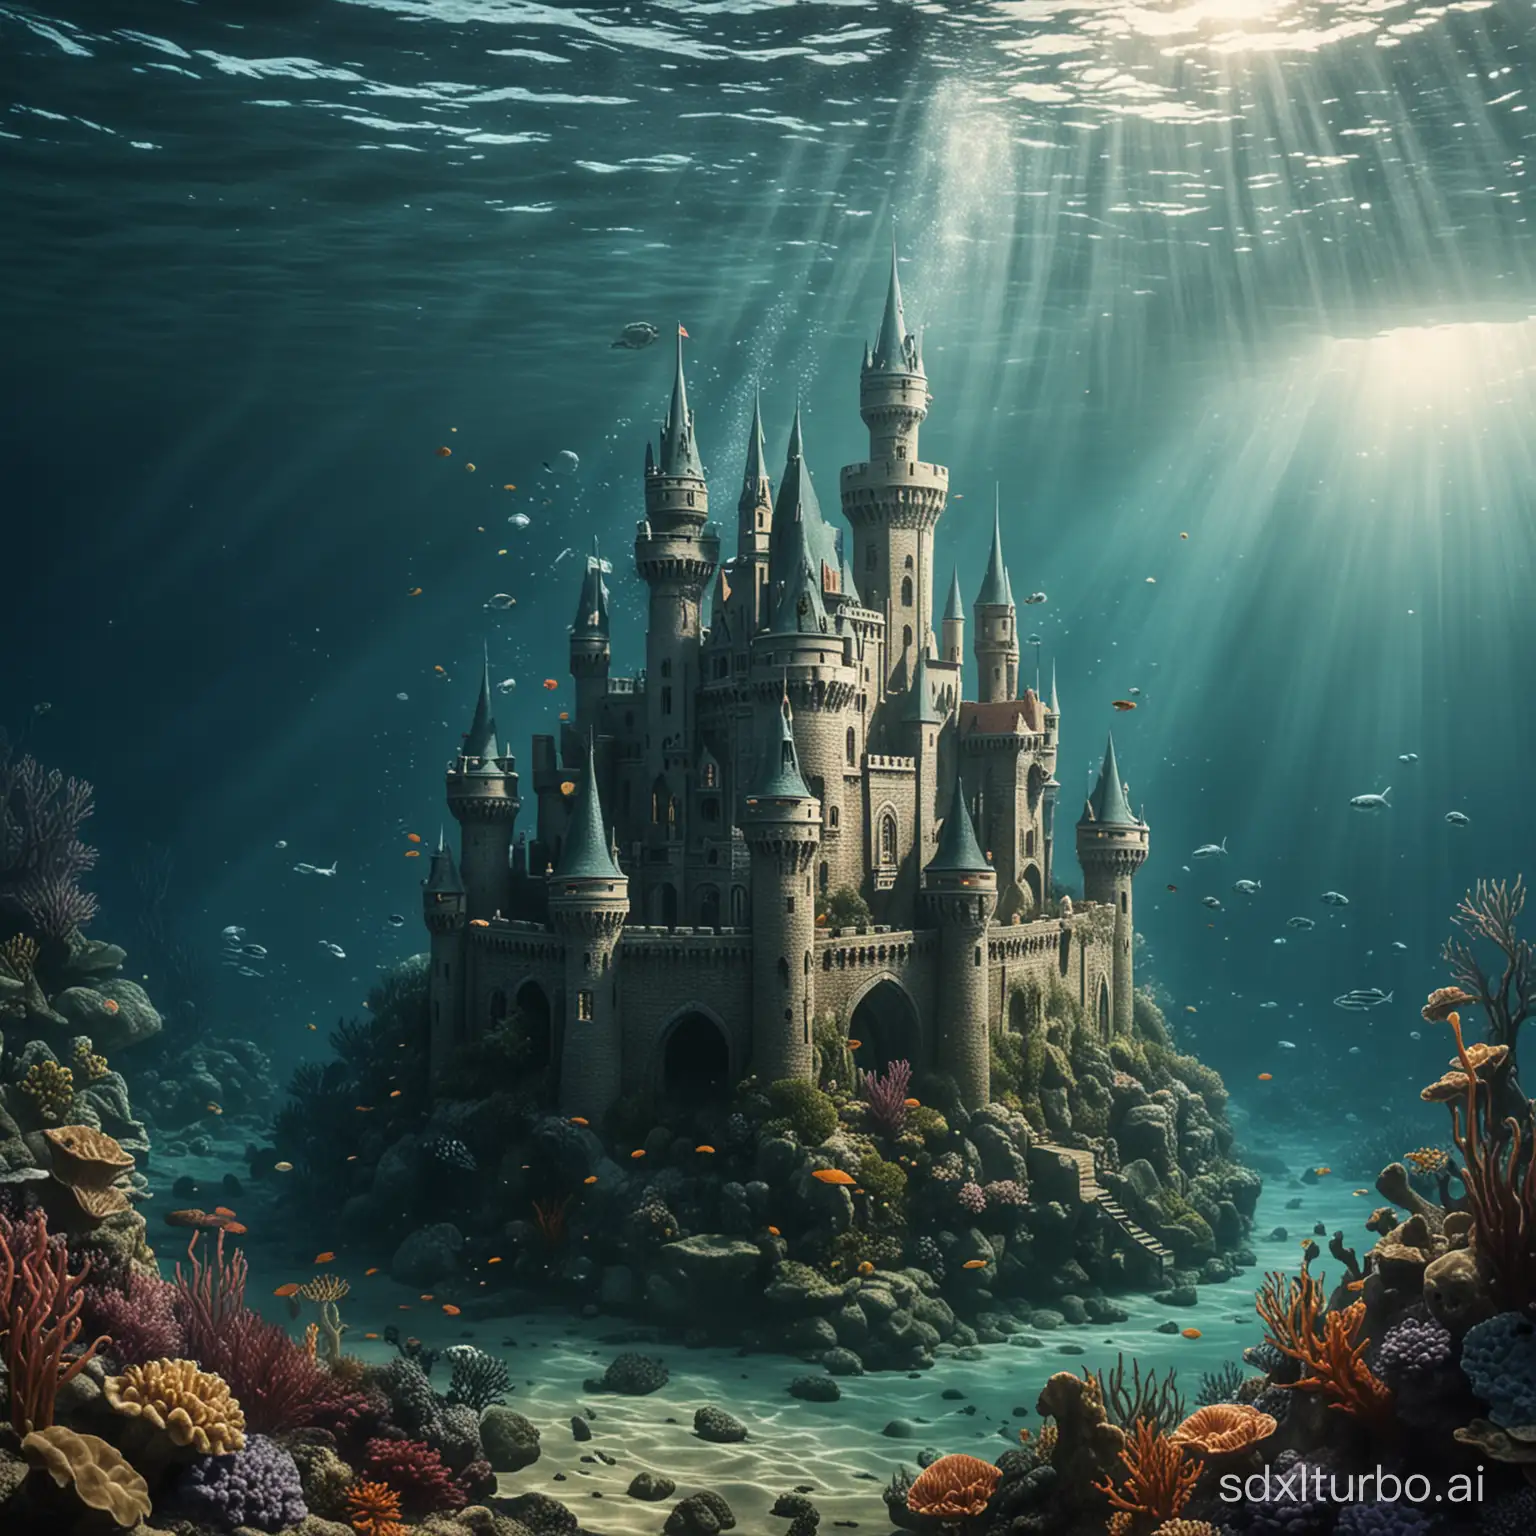 Submerged-Castle-Beneath-the-Ocean-Waves